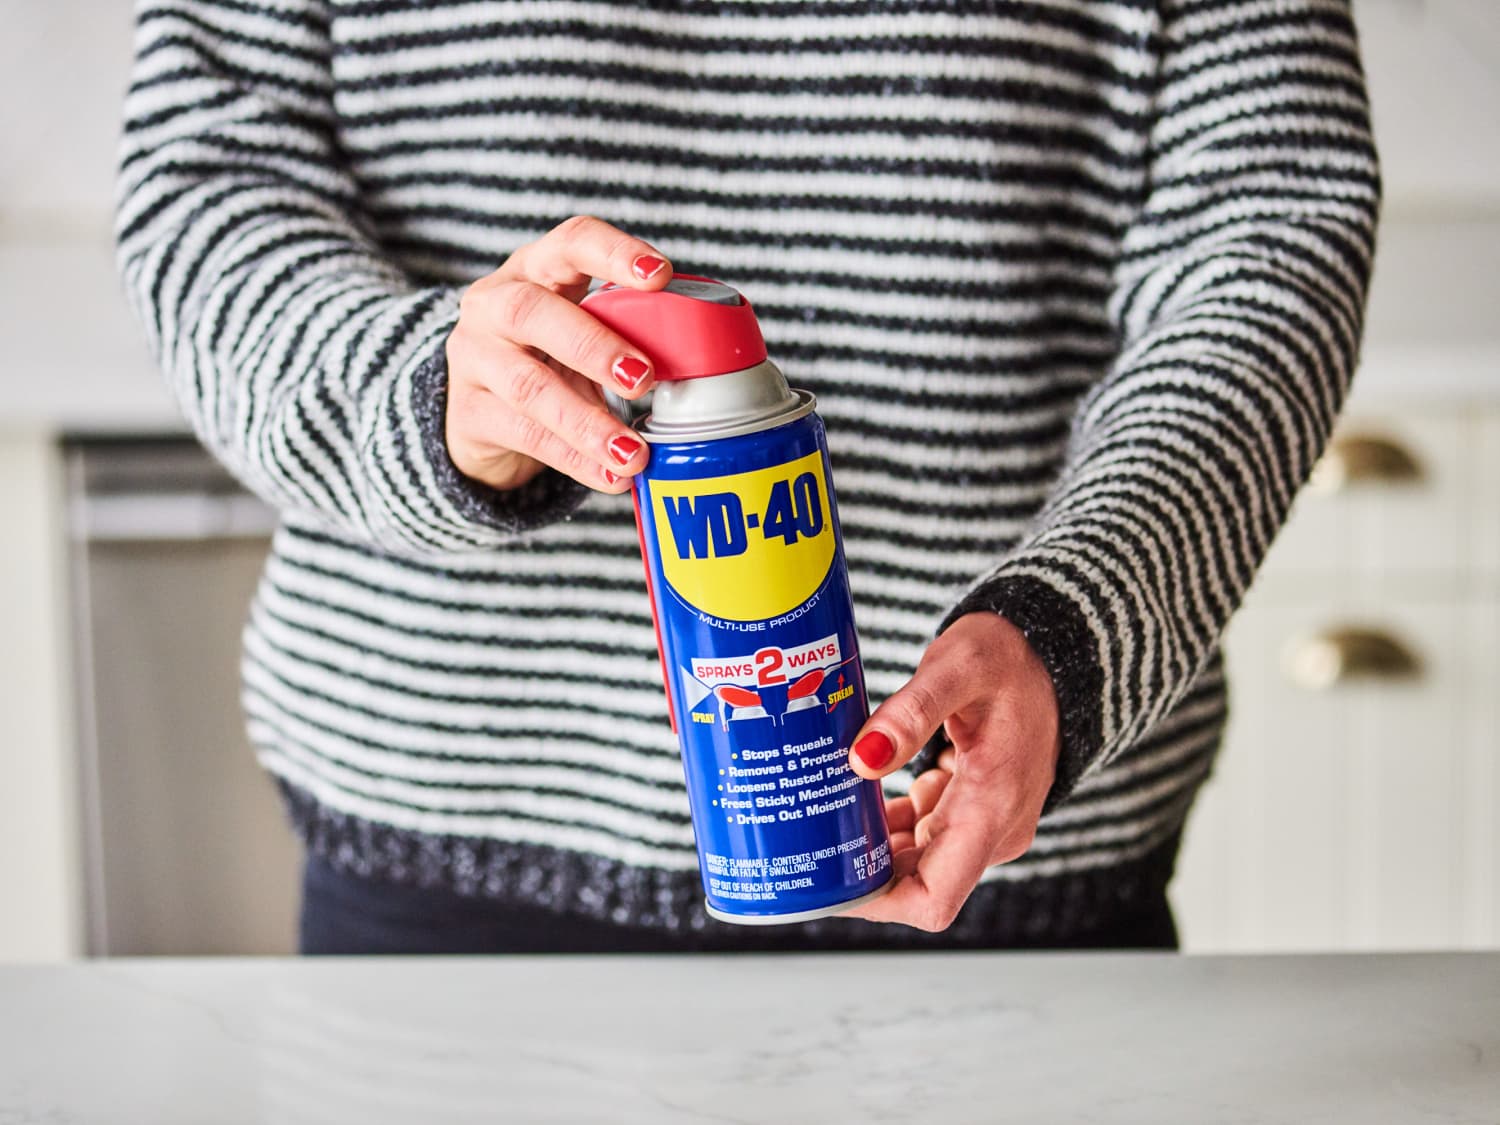 WD 40 use